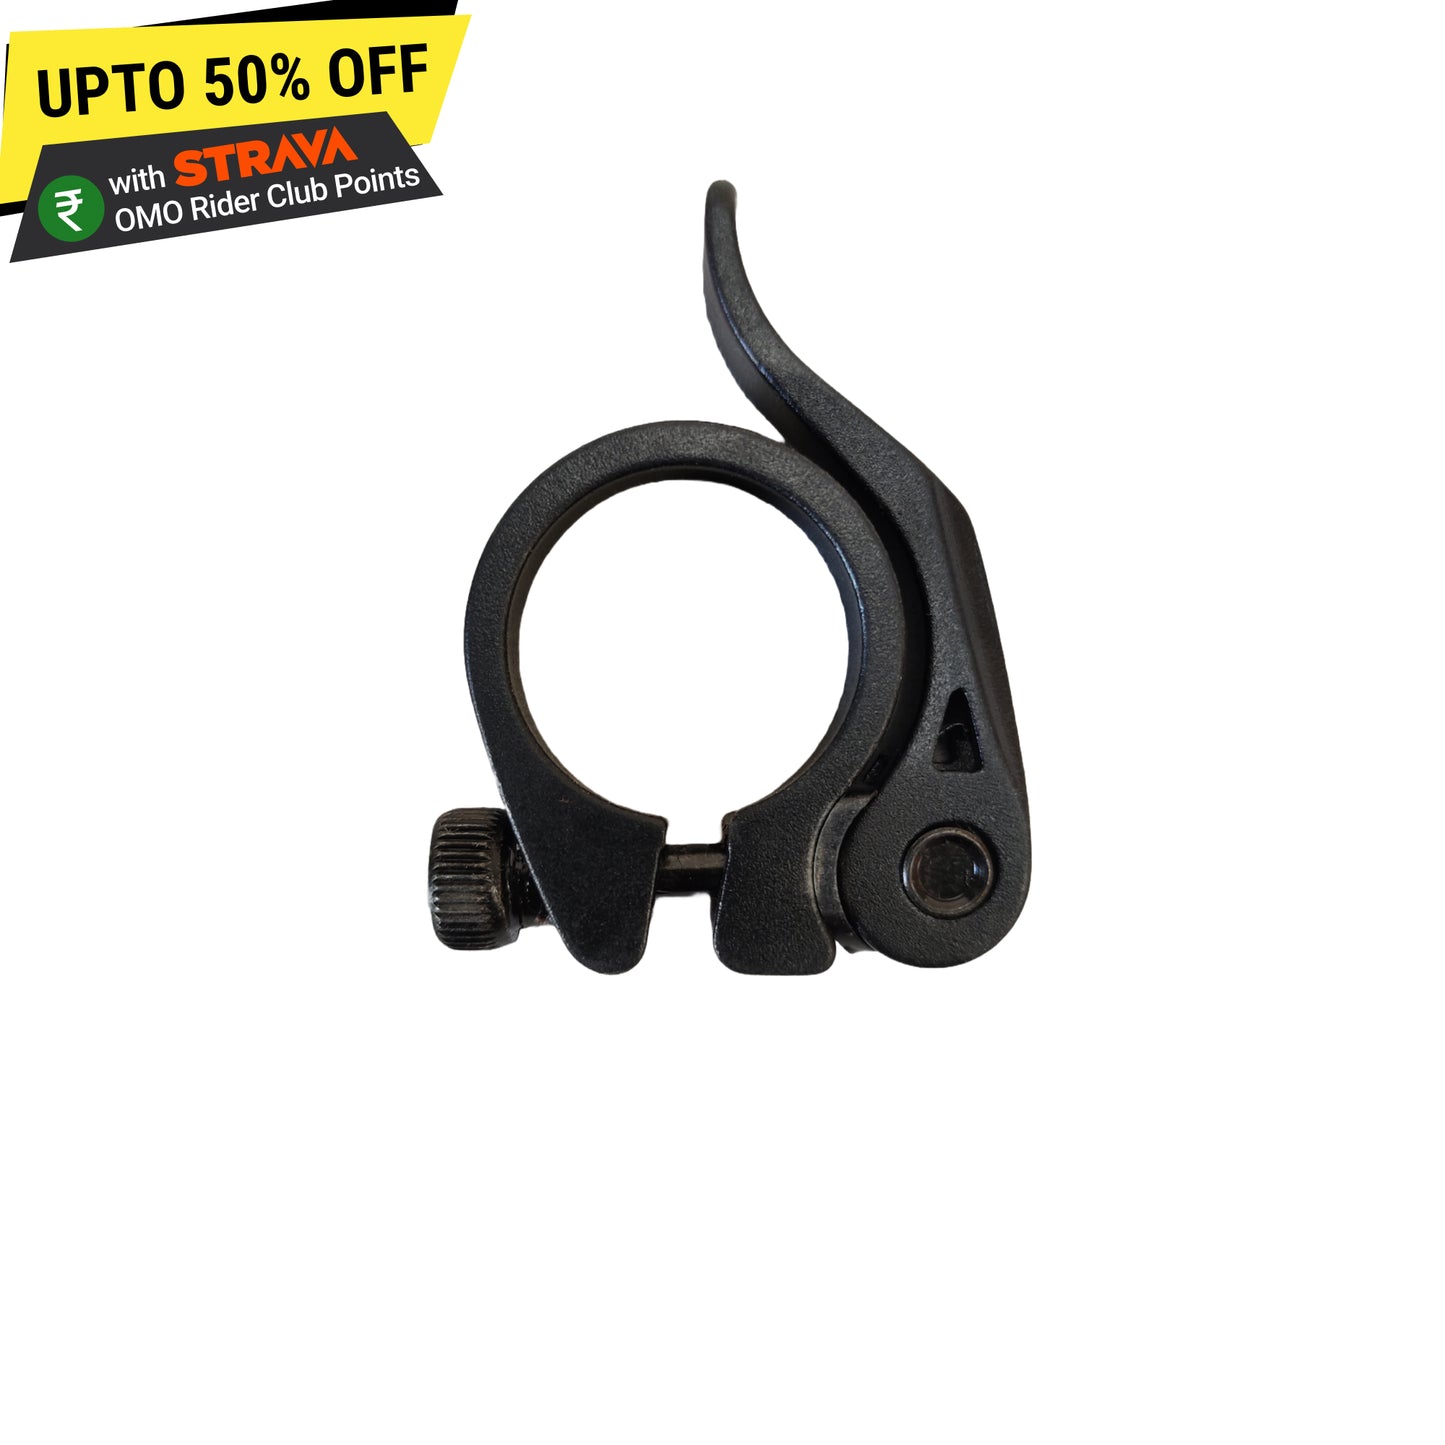 Seat Post Clamp with Quick Release for Bicycle